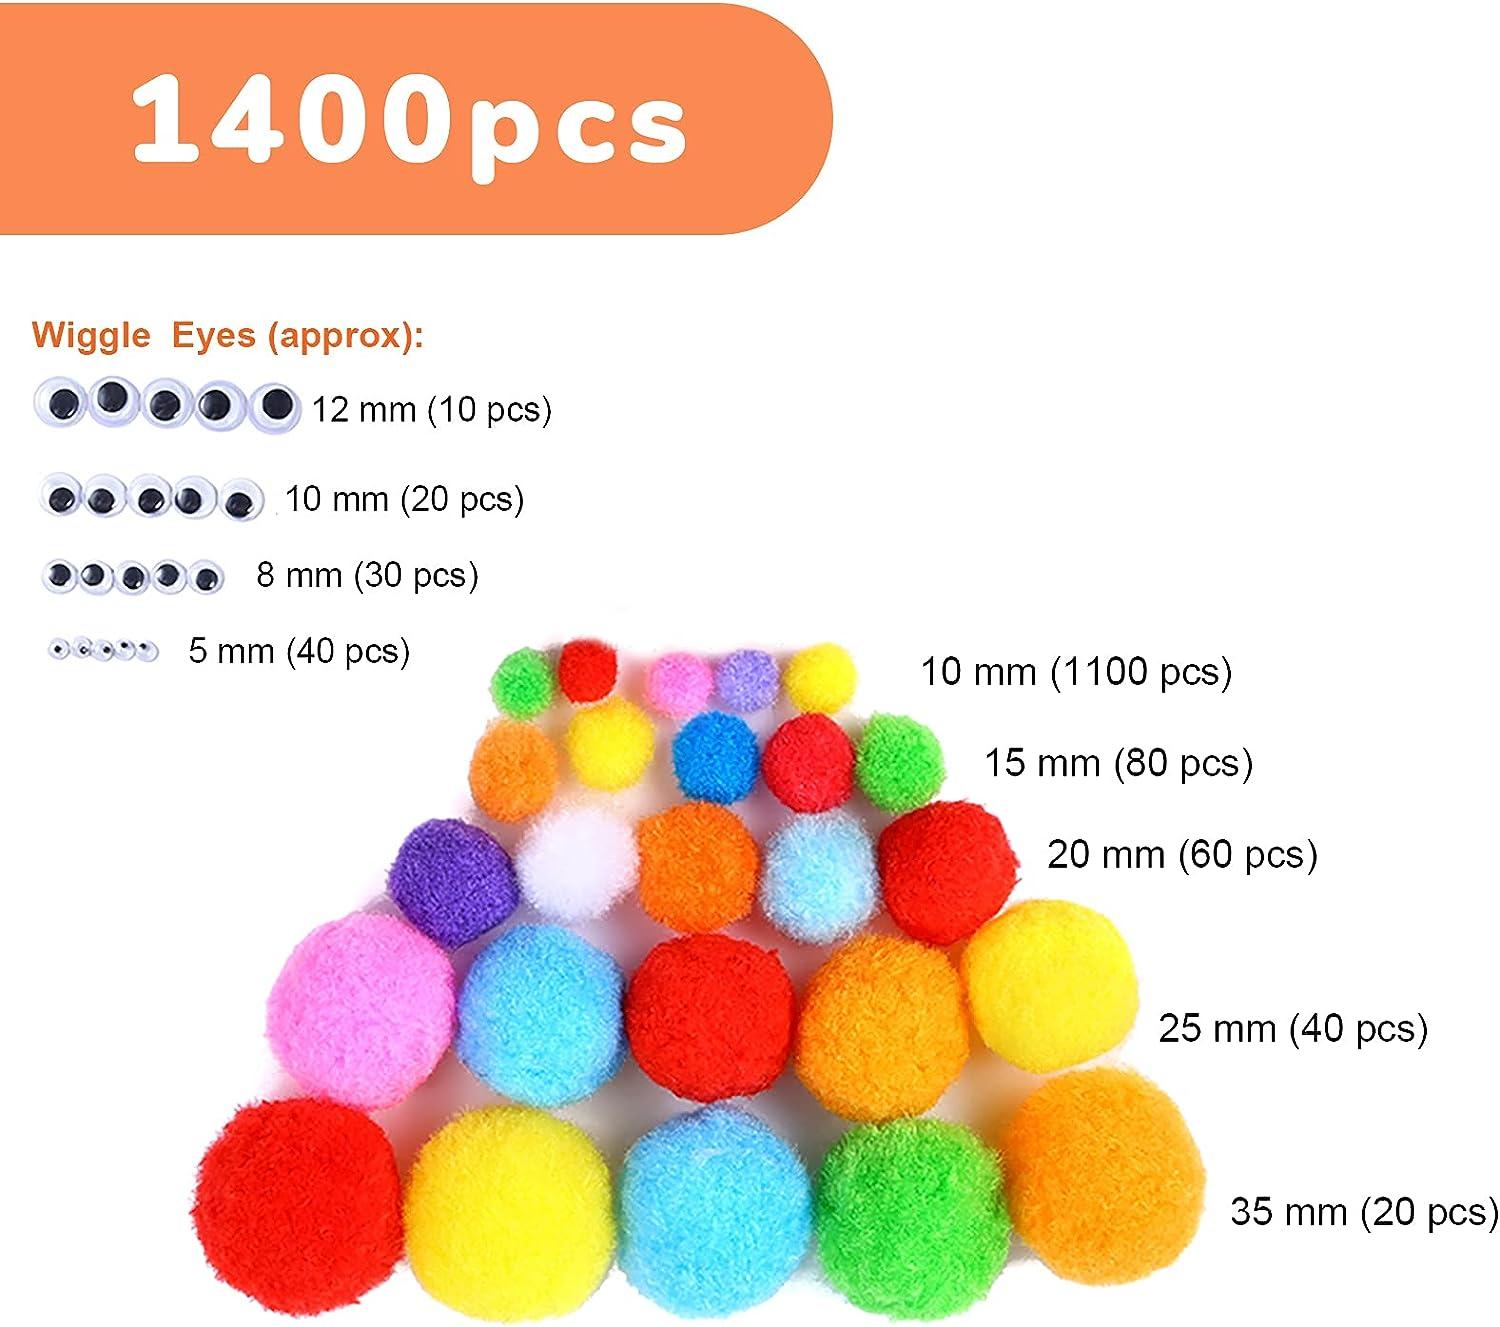 35mm White Pom Poms For Crafts Decoration Sewing Card Making Hobby